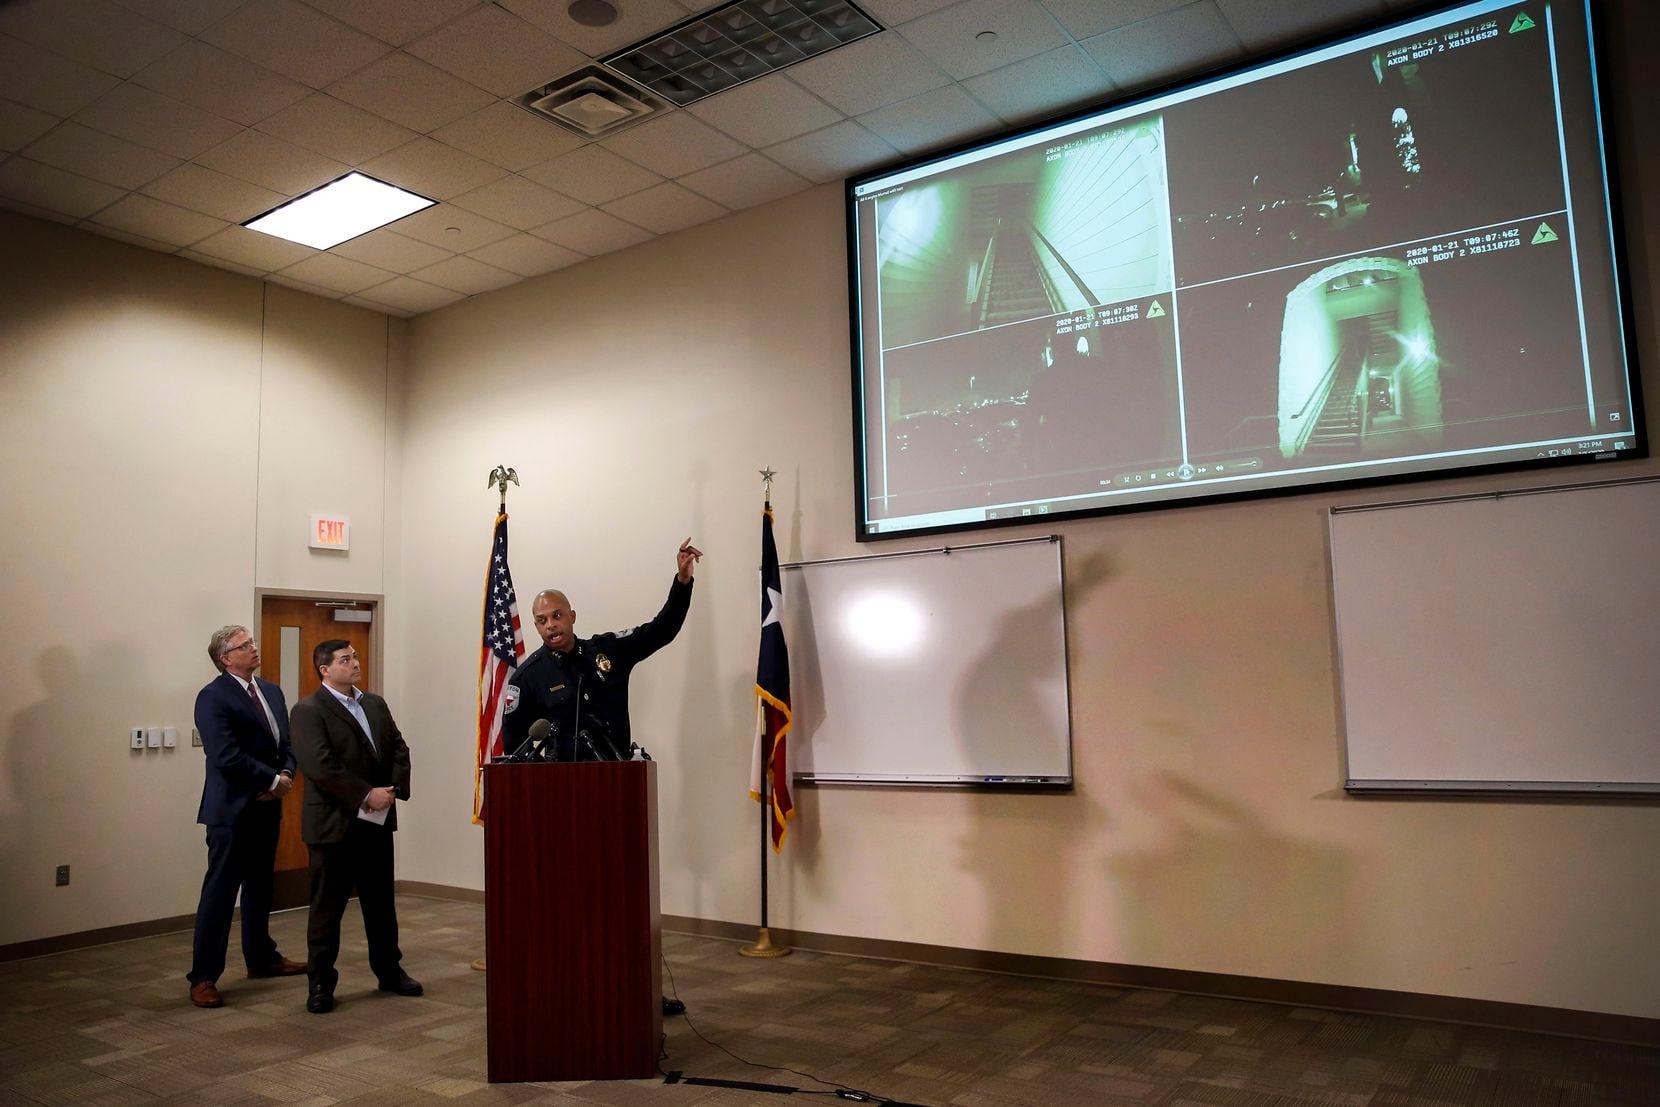 Denton Mayor Chris Watts, left, and City Manager Todd Hileman, center, and Police Chief Frank Dixon, right, watched body camera footage during a press conference regarding a January officer-involved shooting on Thursday, March 5, 2020, at the Denton Public Safety Training Center in Denton, Texas. (Ryan Michalesko/The Dallas Morning News)